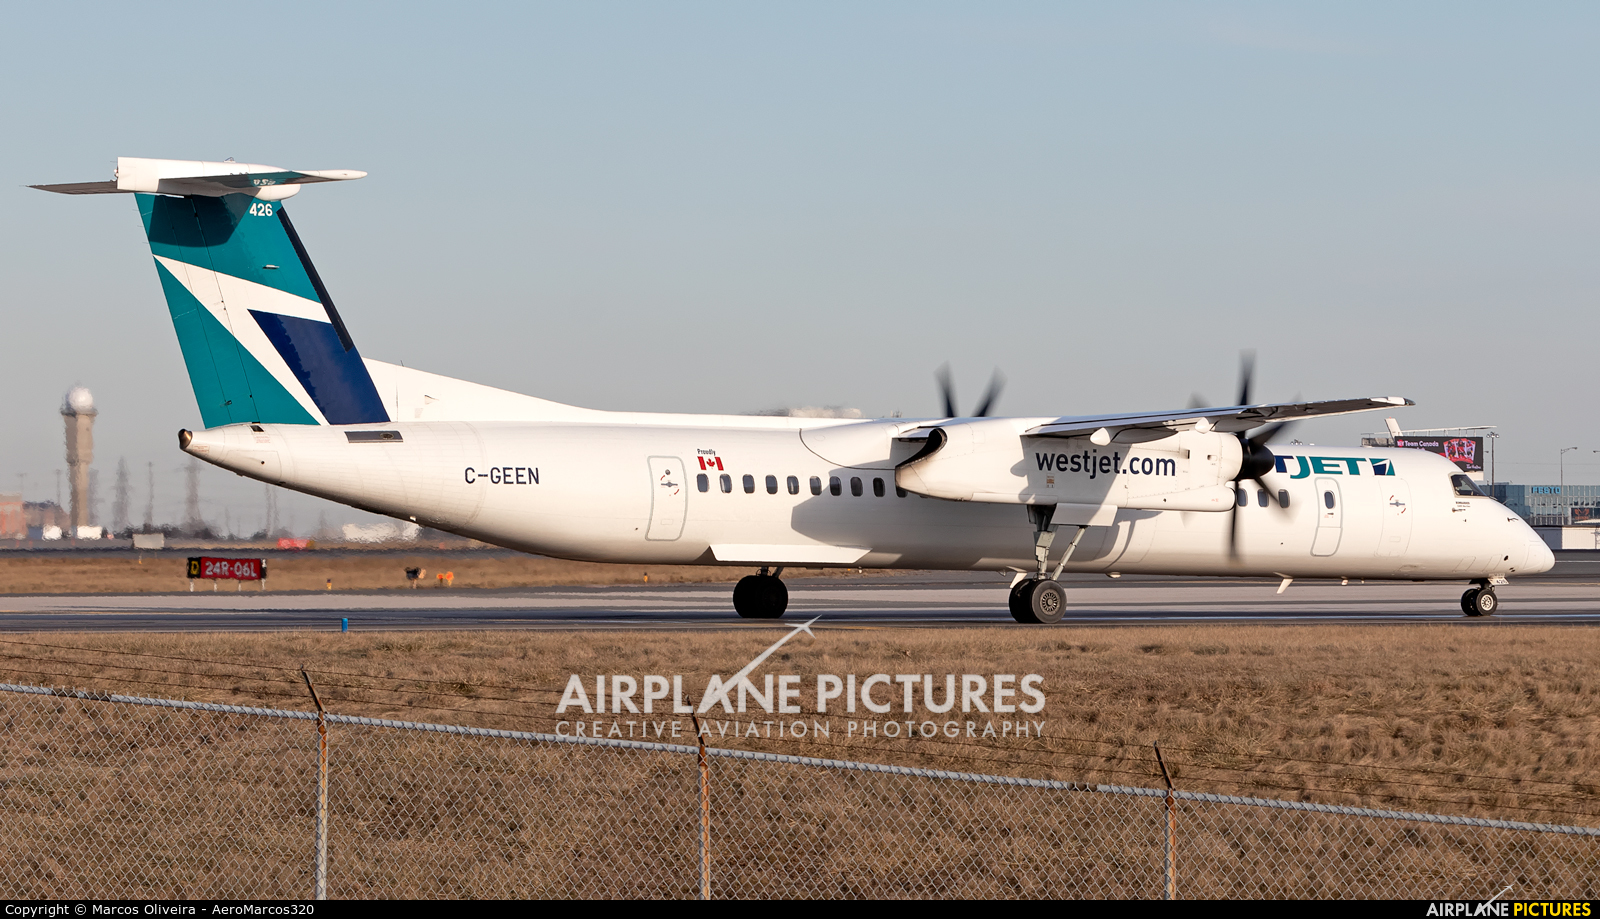 WestJet Encore C-GEEN aircraft at Toronto - Pearson Intl, ON